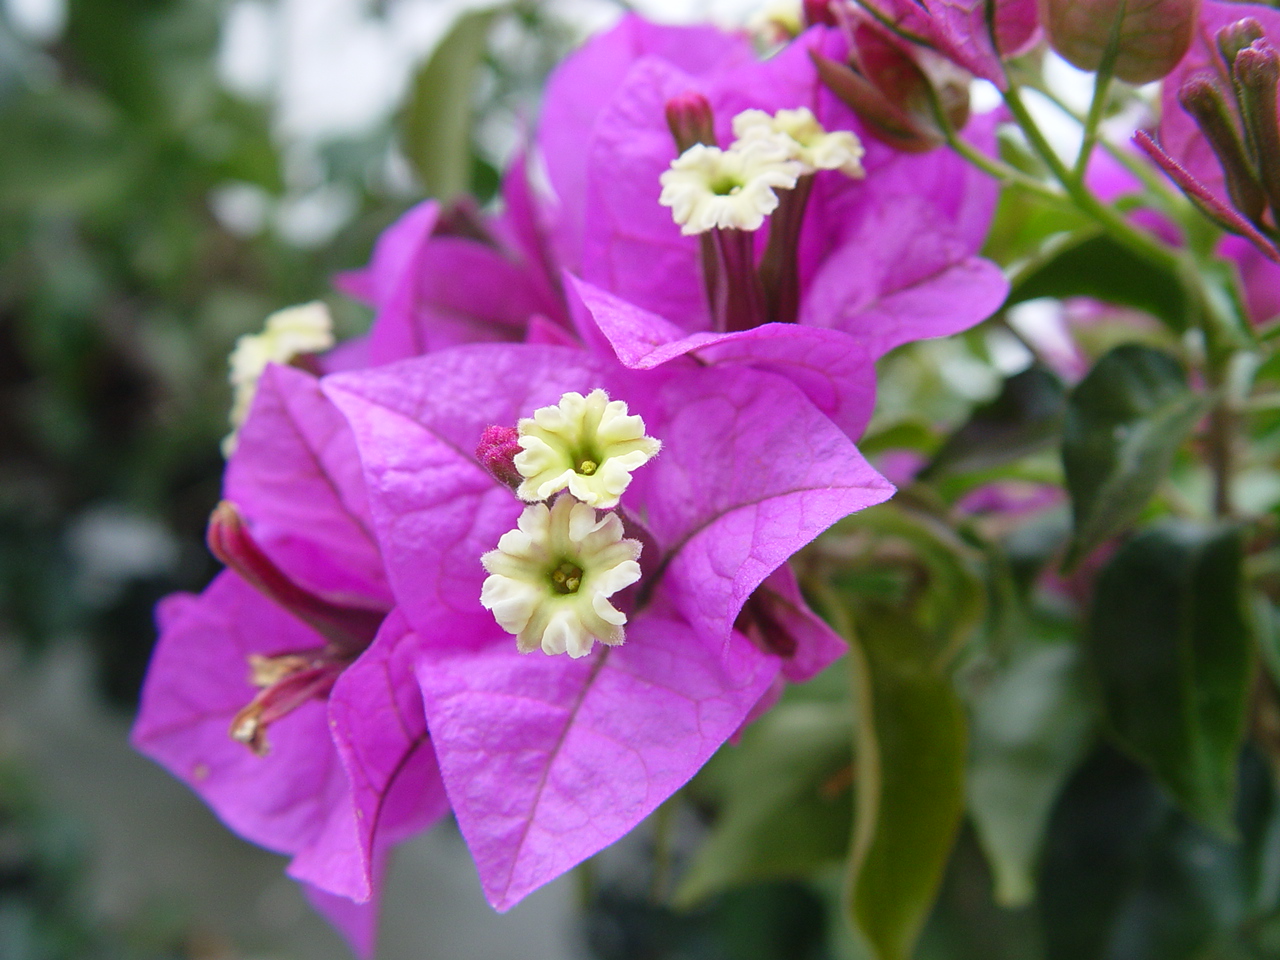 <p><span style="font-family: Inter, helvetica, arial, sans-serif">lesser bougainvillea or paperflower</span></p>